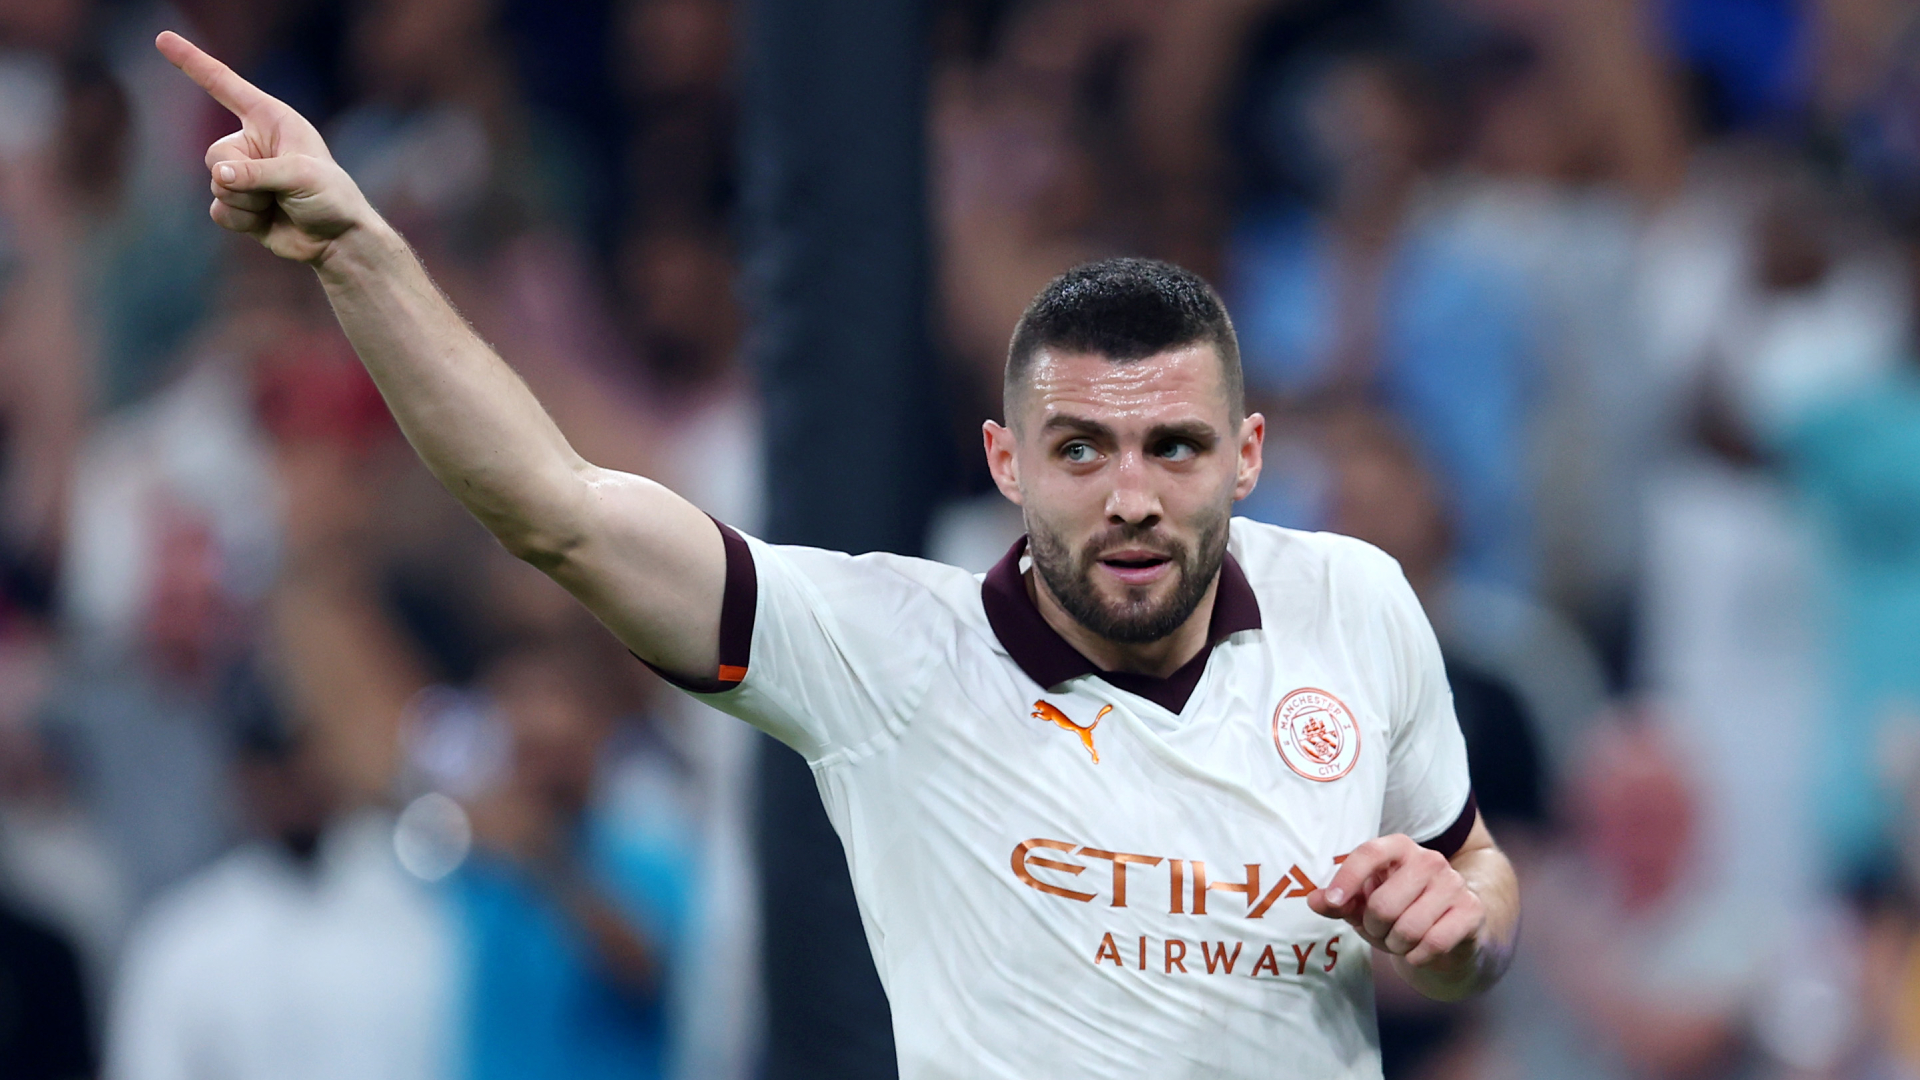 Mateo Kovacic Manchester City Mundial de Clubes 12192023 (Getty Images)